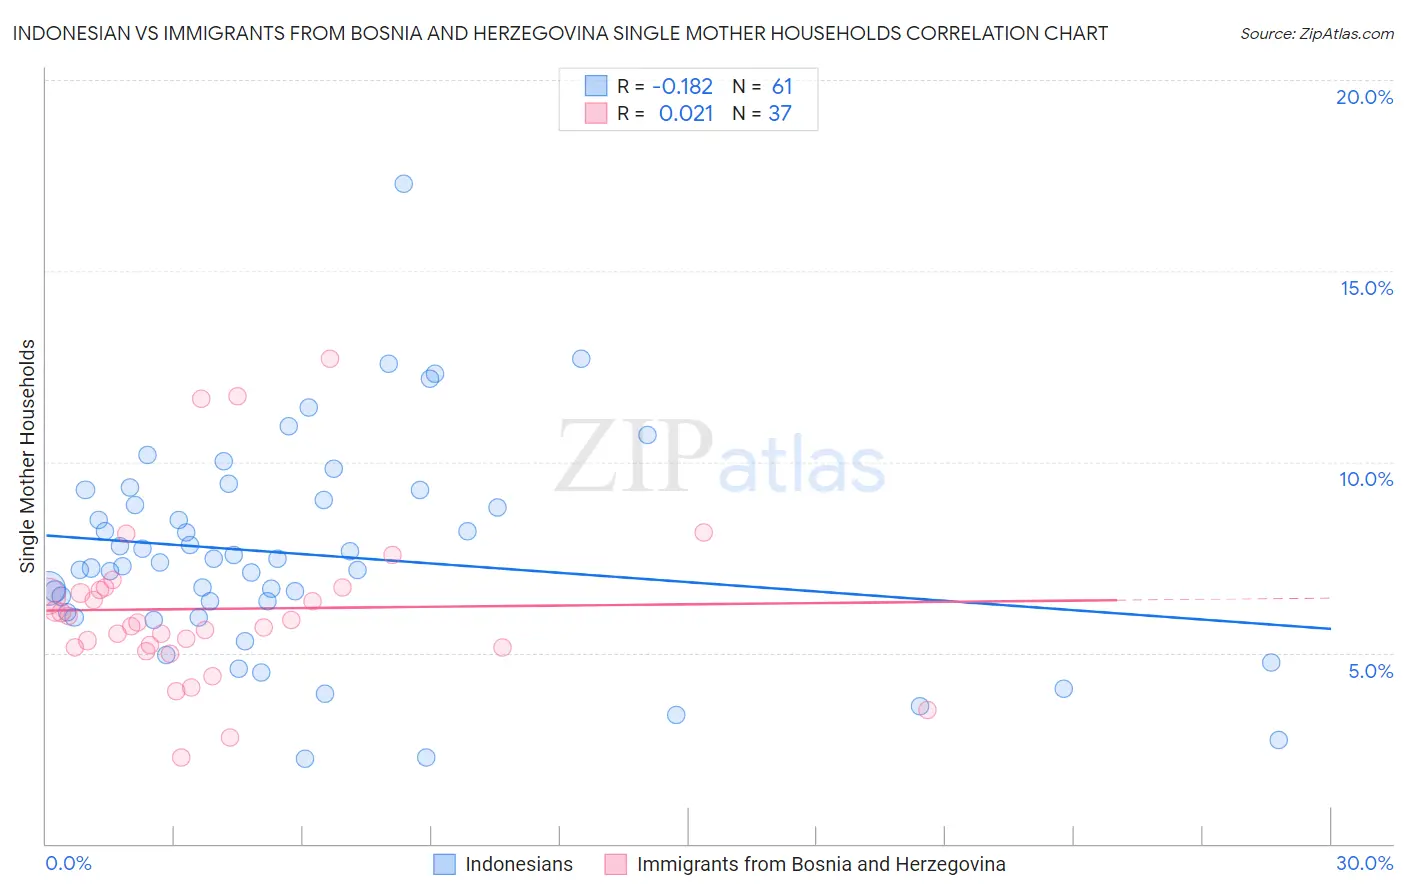 Indonesian vs Immigrants from Bosnia and Herzegovina Single Mother Households